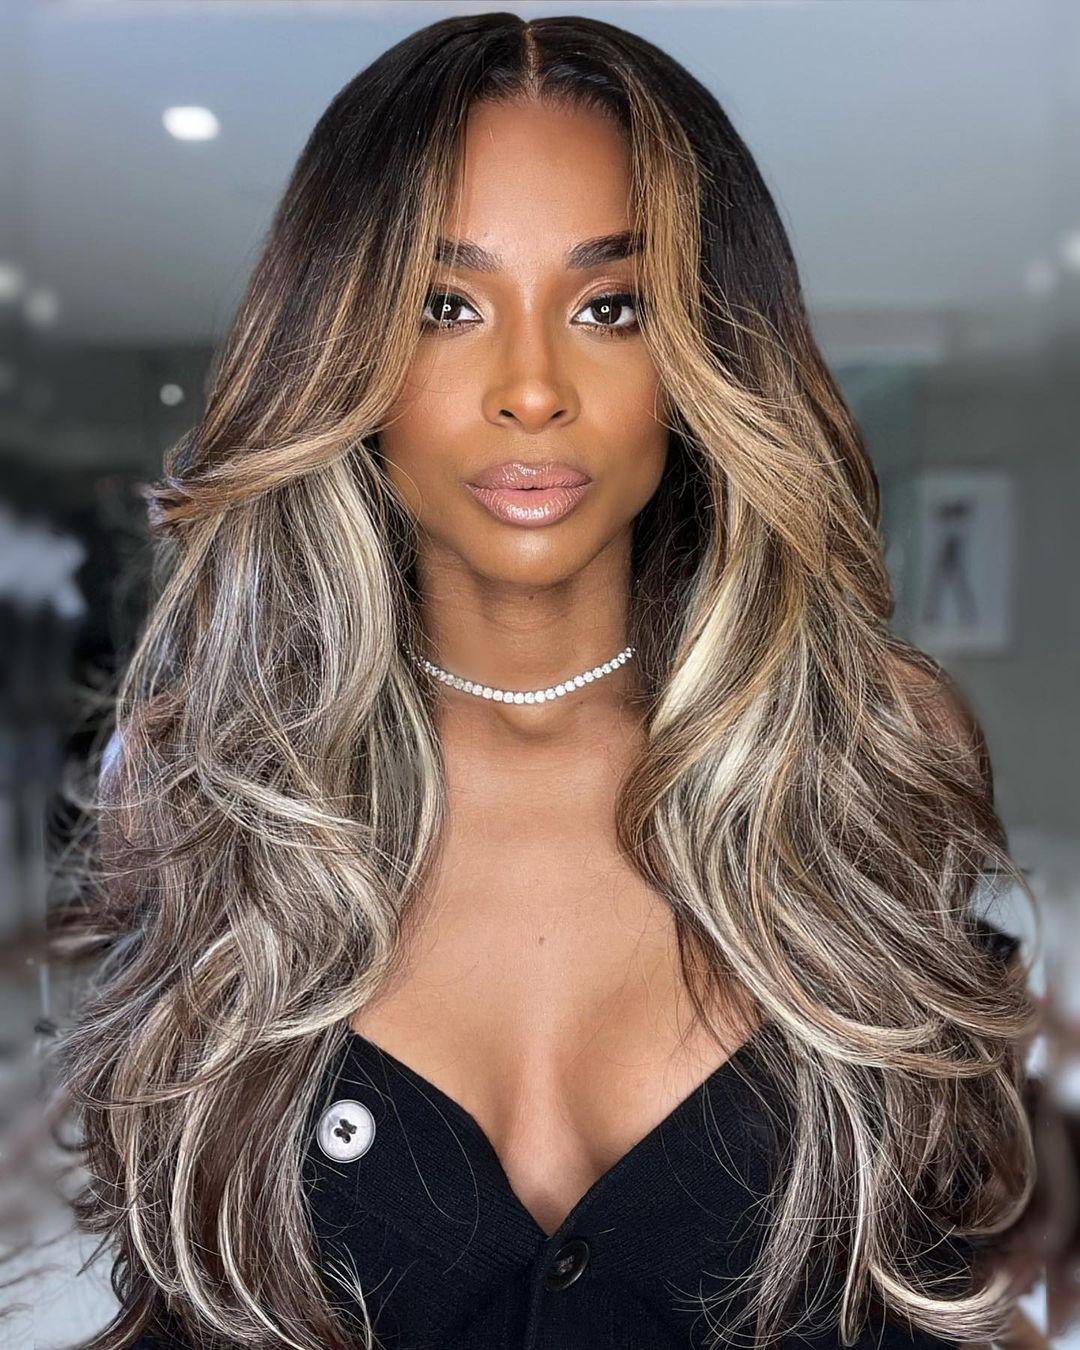 Ciara's Critiques & Supporters Go To War Of Words Over Her Revealing Oscar Party Dress